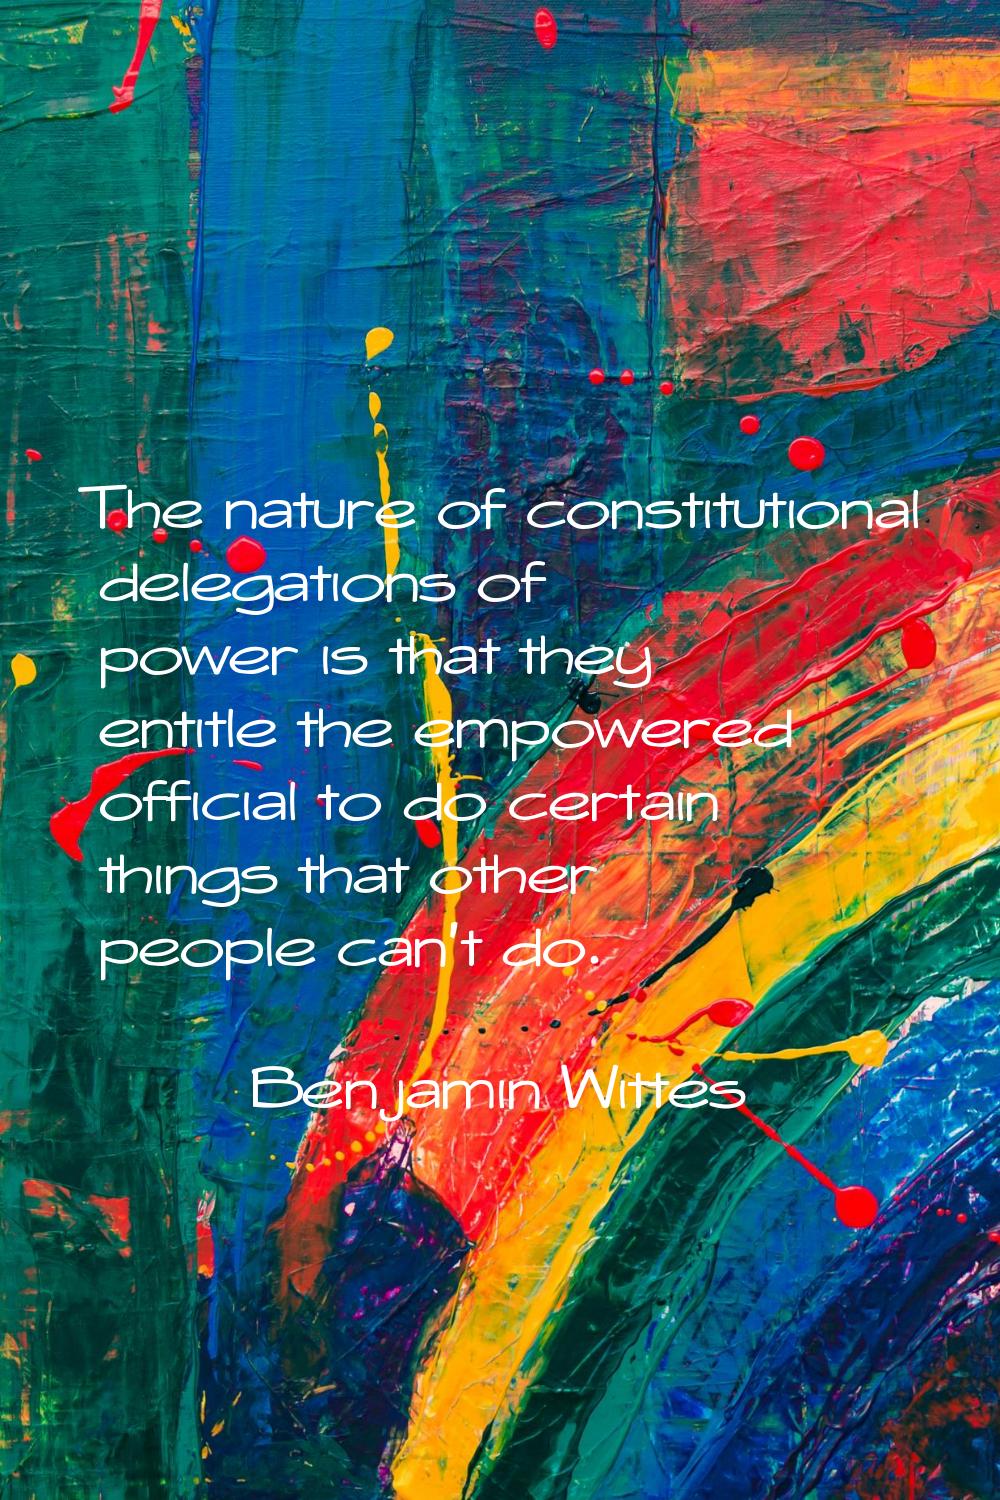 The nature of constitutional delegations of power is that they entitle the empowered official to do